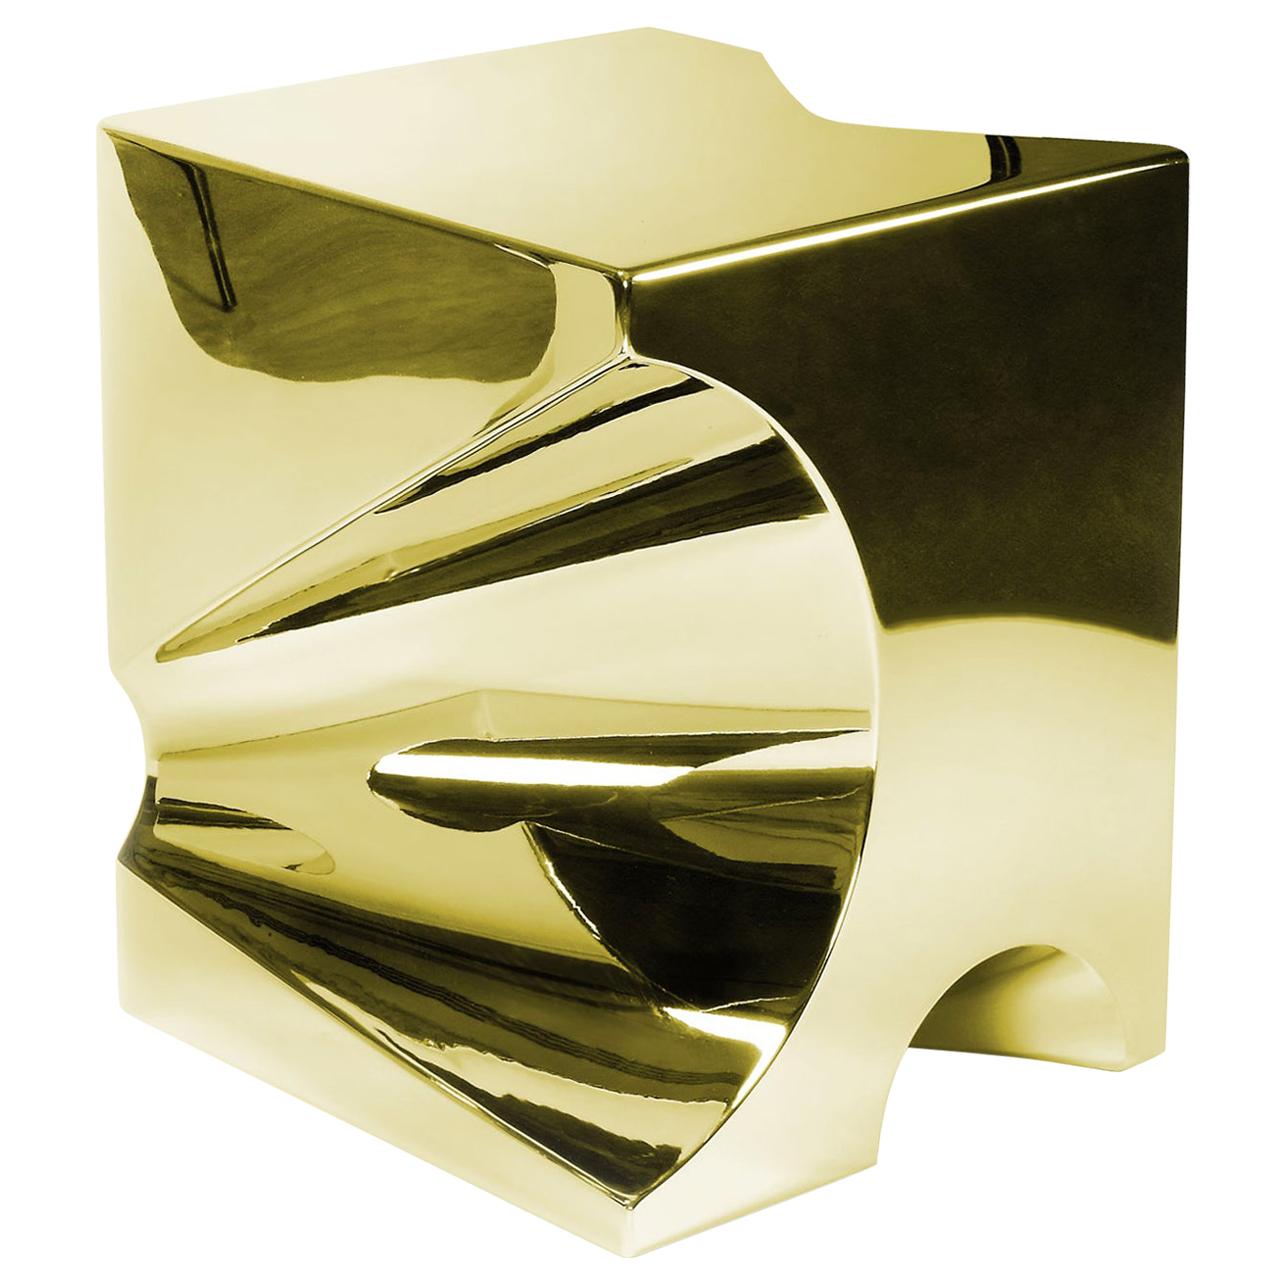 Side or End Table Abstract Sculpture Gold Mirror Steel Cube Collectible Design For Sale